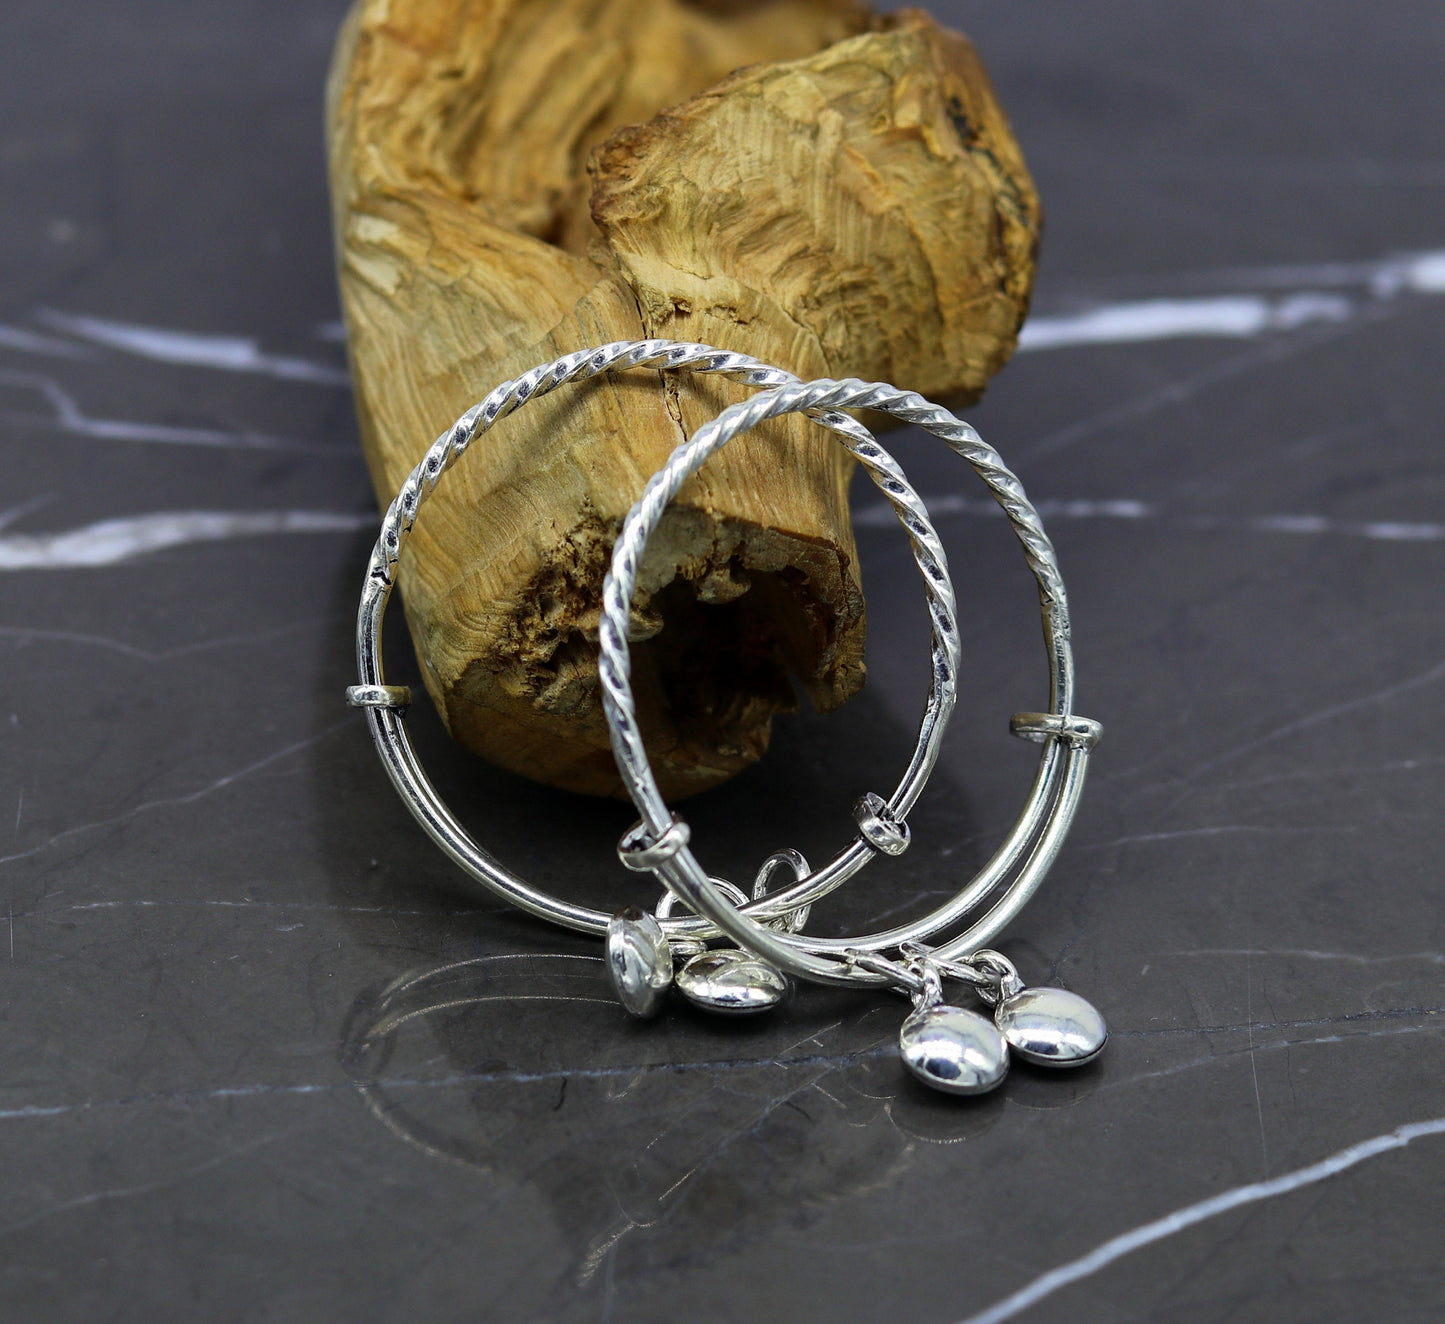 925 sterling silver handmade tribal twisted style baby bangles bracelet, unisex new born baby gifting kids jewelry tribal jewelry bbk79 - TRIBAL ORNAMENTS